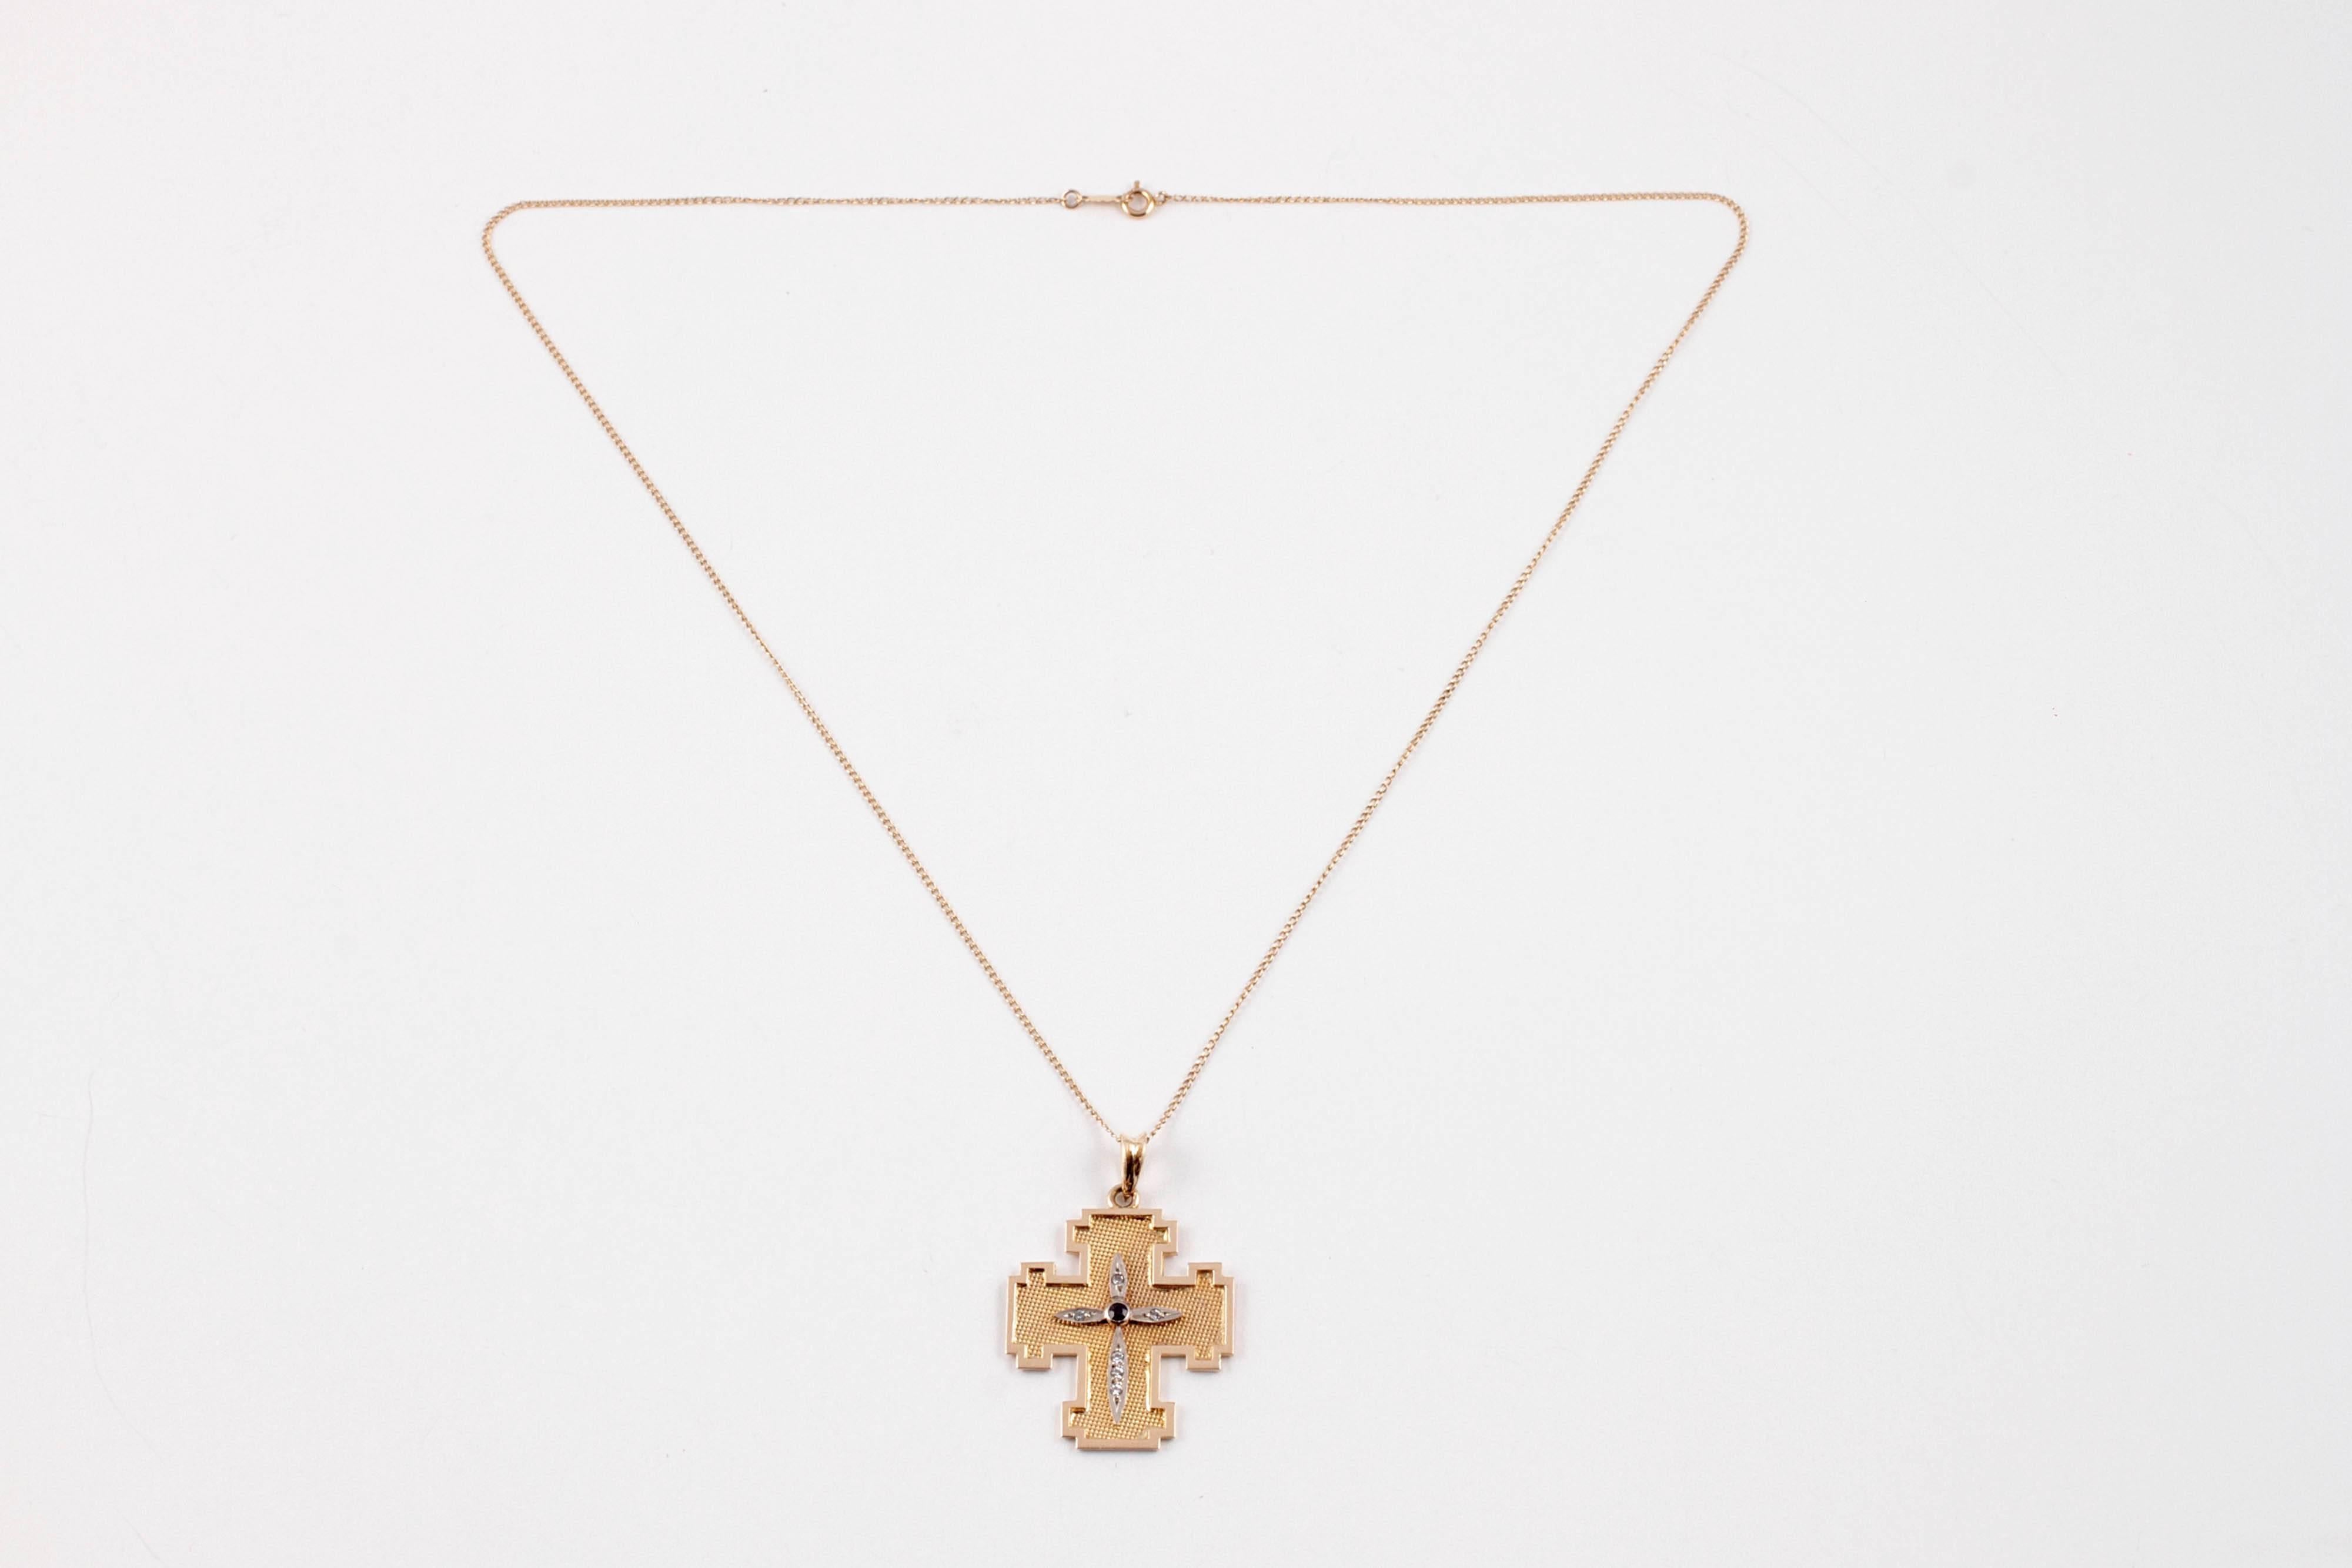 For a cross necklace that is a little out of the ordinary - pick this one!  In 14 karat yellow gold with a sapphire and simulated diamonds.  The chain is 18 inches in length and the pendant is 1 1/2 inches in length.